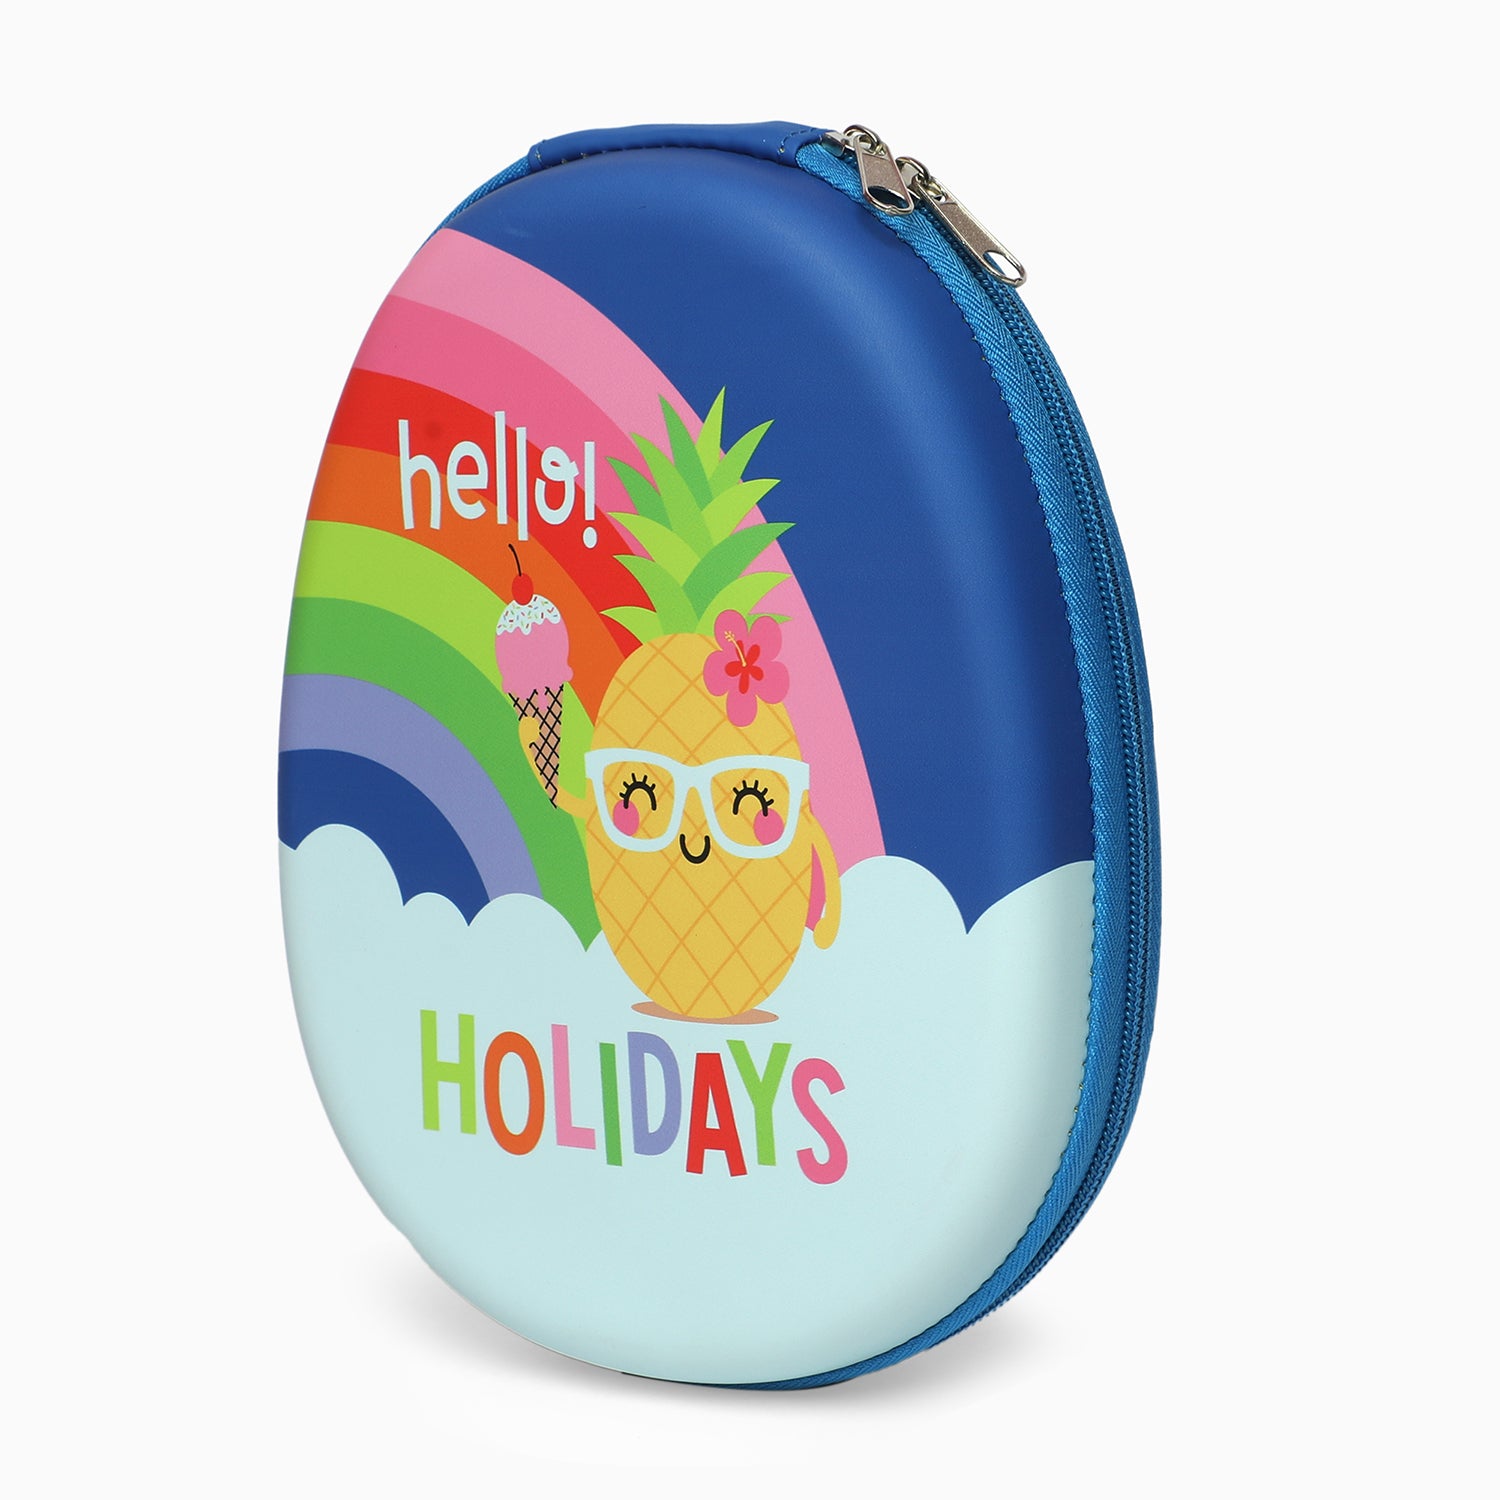 ZORSE OVAL hard pencil case hello holidays with multipurpose use